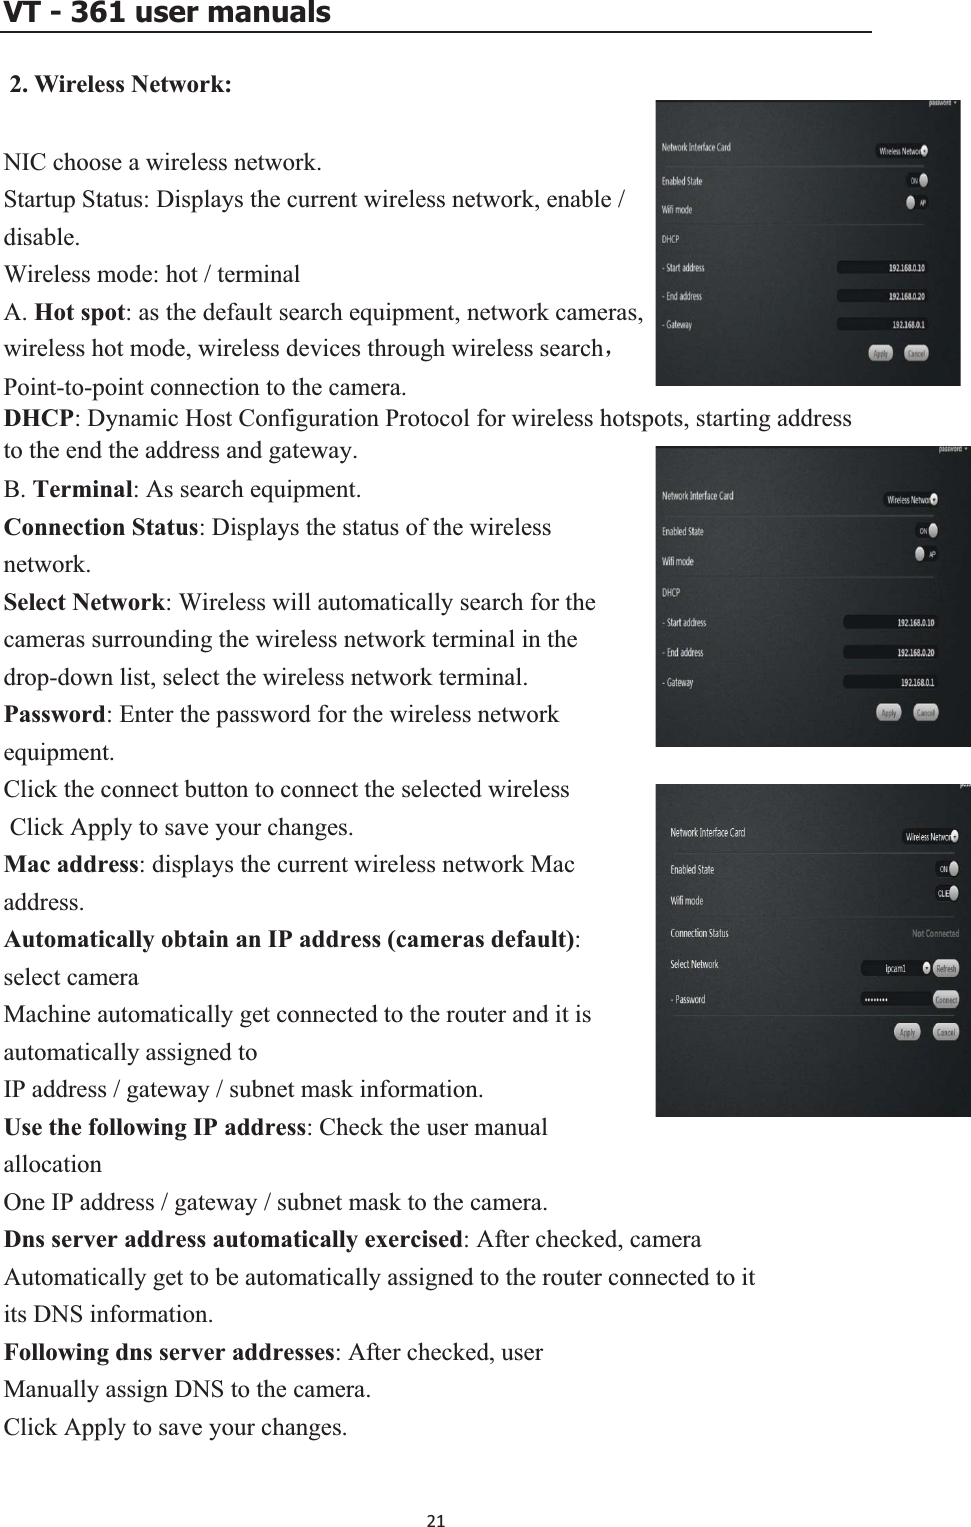 VT - 361 user manuals 2. Wireless Network:NIC choose a wireless network.   Startup Status: Displays the current wireless network, enable / disable.Wireless mode: hot / terminal A. Hot spot: as the default search equipment, network cameras, wireless hot mode, wireless devices through wireless searchˈPoint-to-point connection to the camera.   DHCP: Dynamic Host Configuration Protocol for wireless hotspots, starting address to the end the address and gateway.     B. Terminal: As search equipment. Connection Status: Displays the status of the wireless network.Select Network: Wireless will automatically search for the cameras surrounding the wireless network terminal in the drop-down list, select the wireless network terminal.  network equipment. Click the connect button to connect the selected wireless o save your changes. Mac address: displays the current wireless network Mac t):teway / subnet mask information. era. ecklly get to be automatically assigned to the router connected to it ur changes. Password: Enter the password for the wireless Click Apply taddress.Automatically obtain an IP address (cameras defaulselect camera Machine automatically get connected to the router and it is automatically assigned to IP address / gaUse the following IP address: Check the user manual allocation One IP address / gateway / subnet mask to the camDns server address automatically exercised: After chAutomaticaed, camera its DNS information. Following dns server addresses: After checked, user Manually assign DNS to the camera. Click Apply to save yo21